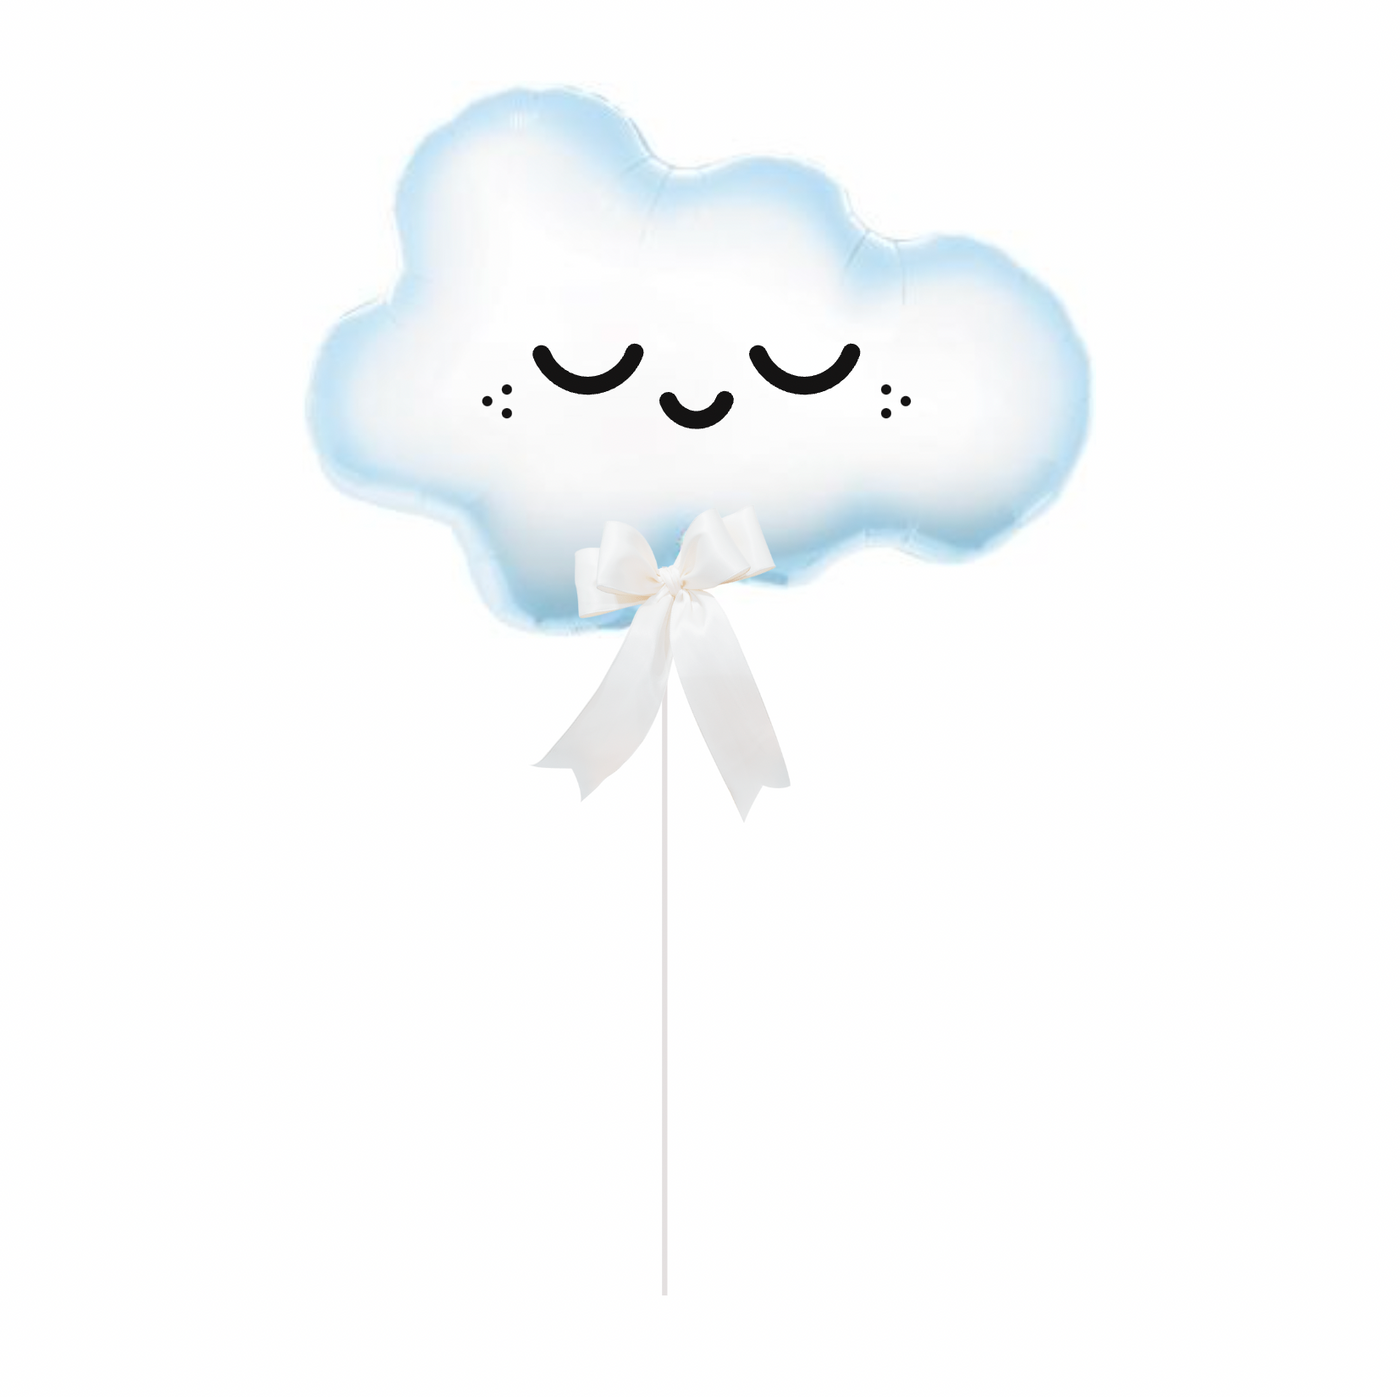 This cute little balloon cloud is personalized with a cute, freckled, sleeping face and a pretty white bow.